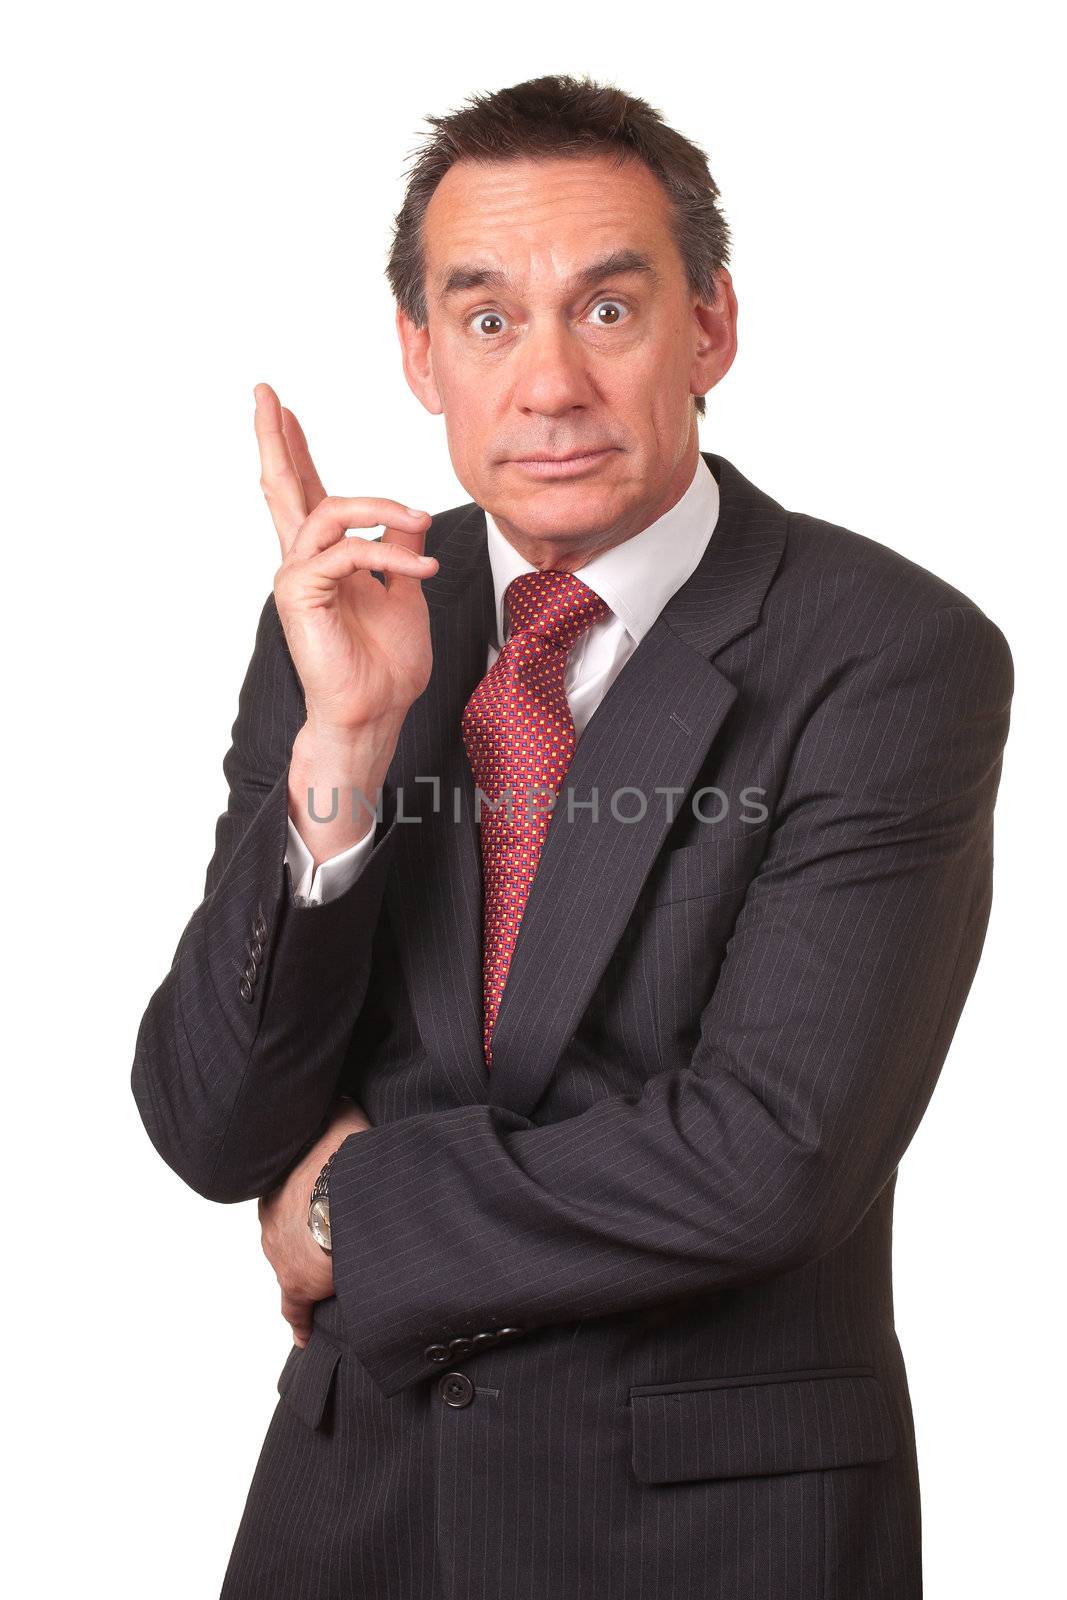 Attractive Surprised Shocked Middle Age Business Man in Suit Isolated